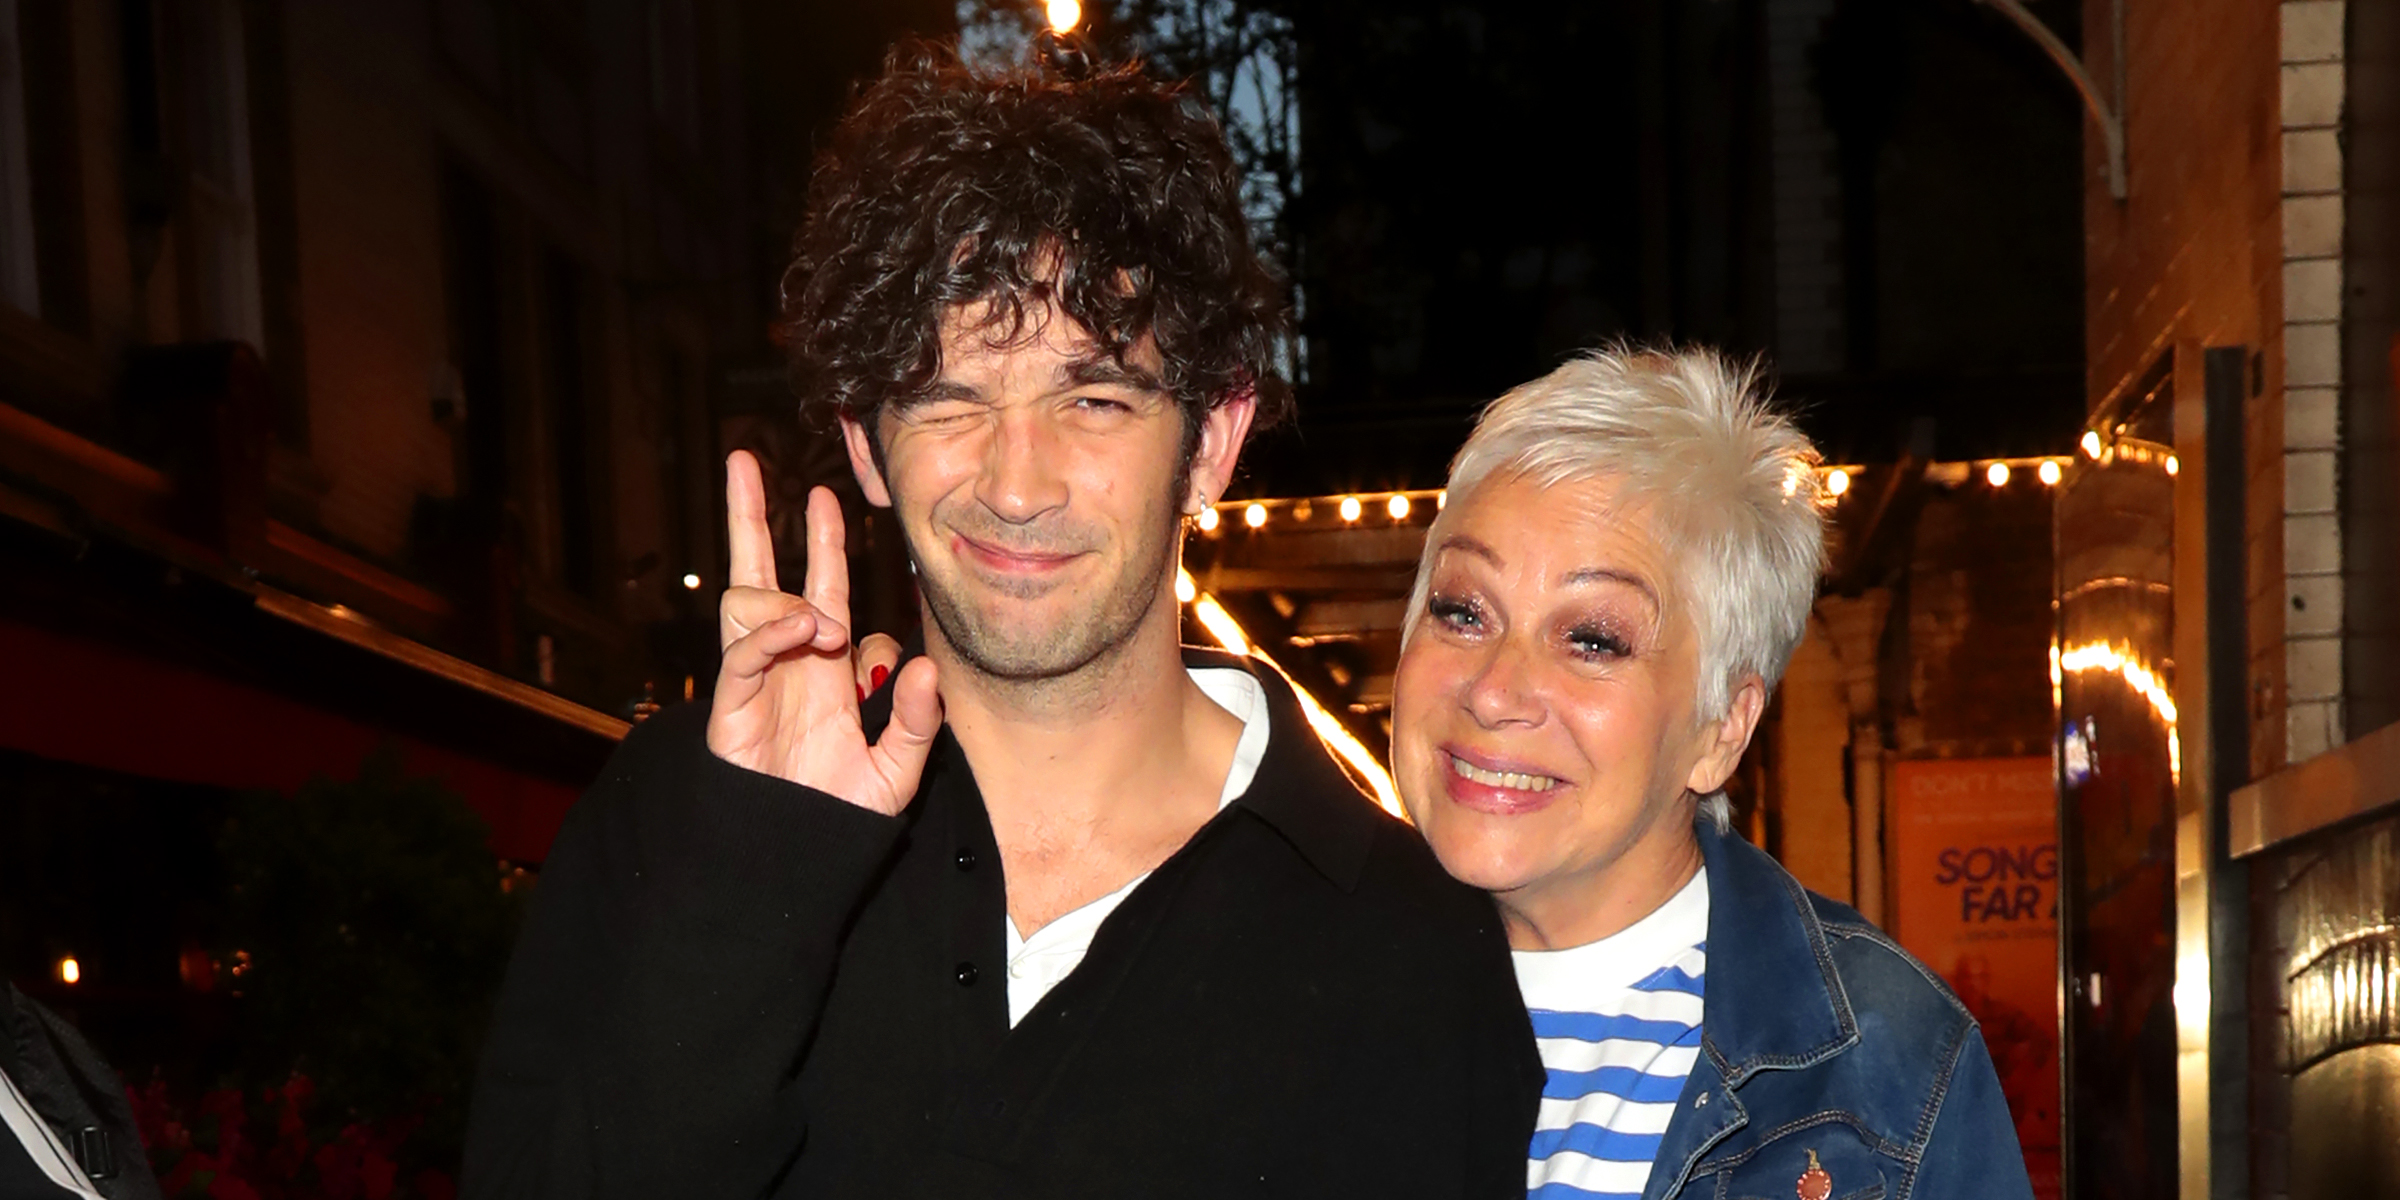 Matty Healy and His Mother Denise Welch | Getty Images